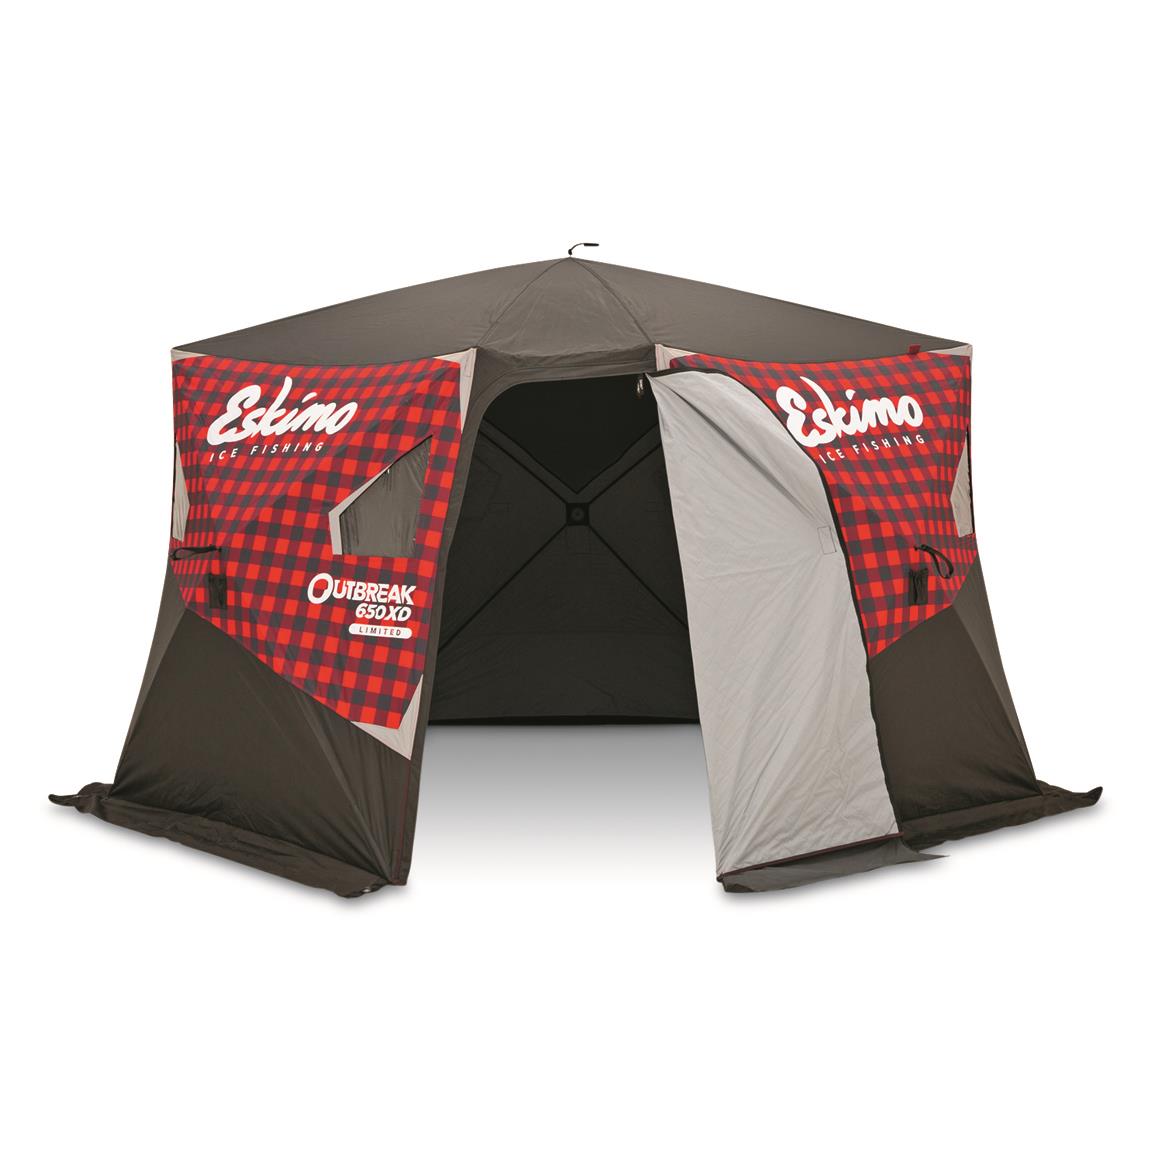 Eskimo Outbreak 650XD Limited Ice Fishing Shelter - 735510, Ice Fishing  Shelters at Sportsman's Guide